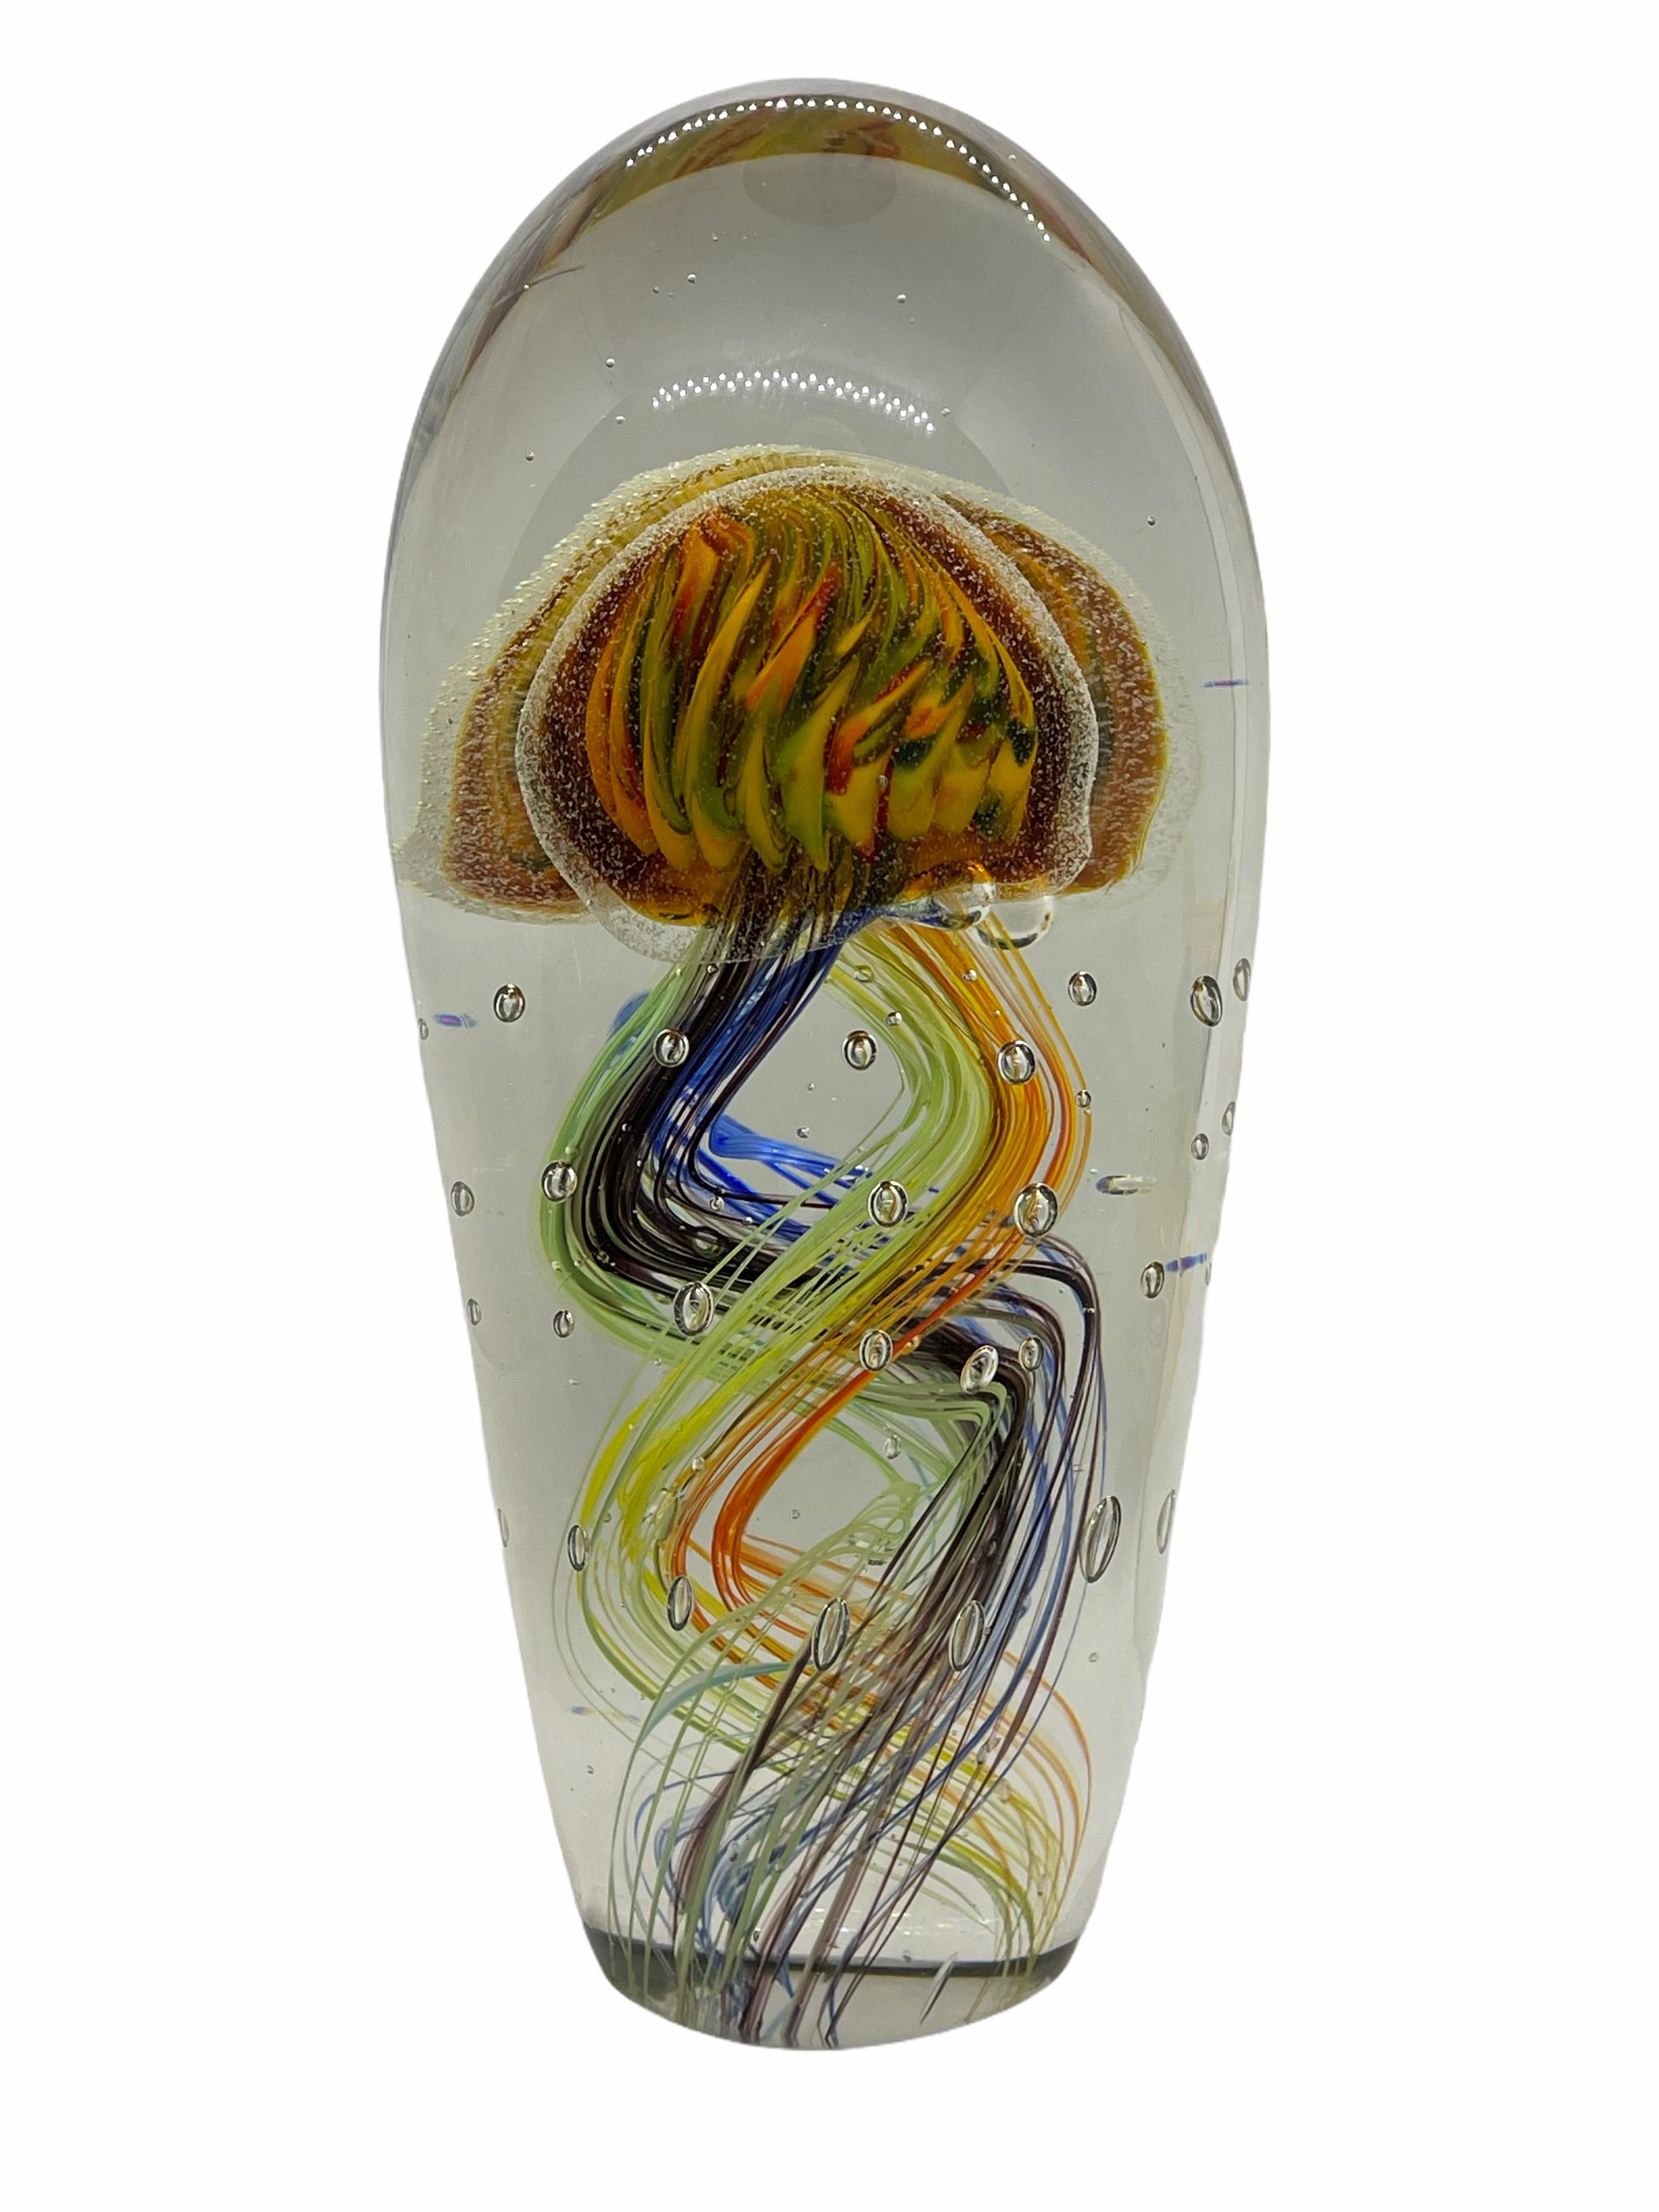 Beautiful stunning large Murano hand blown aquarium design Italian art glass sculpture. Showing two Jelly Fish inside, in two different colors, floating on controlled bubbles. A beautiful nice addition at your table, credenza or side board.